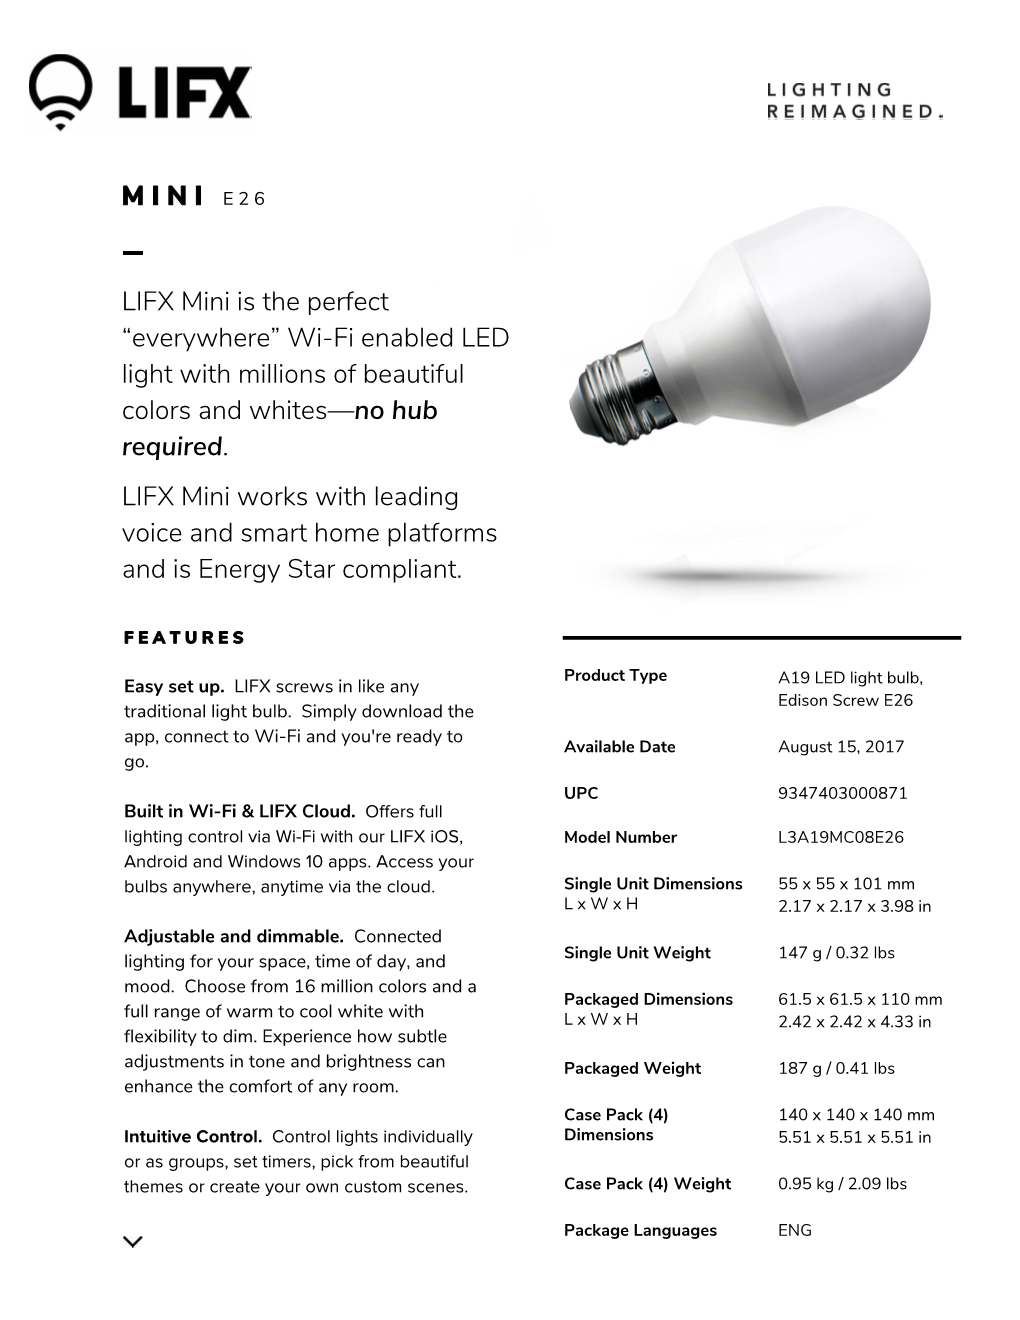 LIFX Mini Is the Perfect “Everywhere” Wi-Fi Enabled LED Light with Millions of Beautiful Colors and Whites—No Hub Required